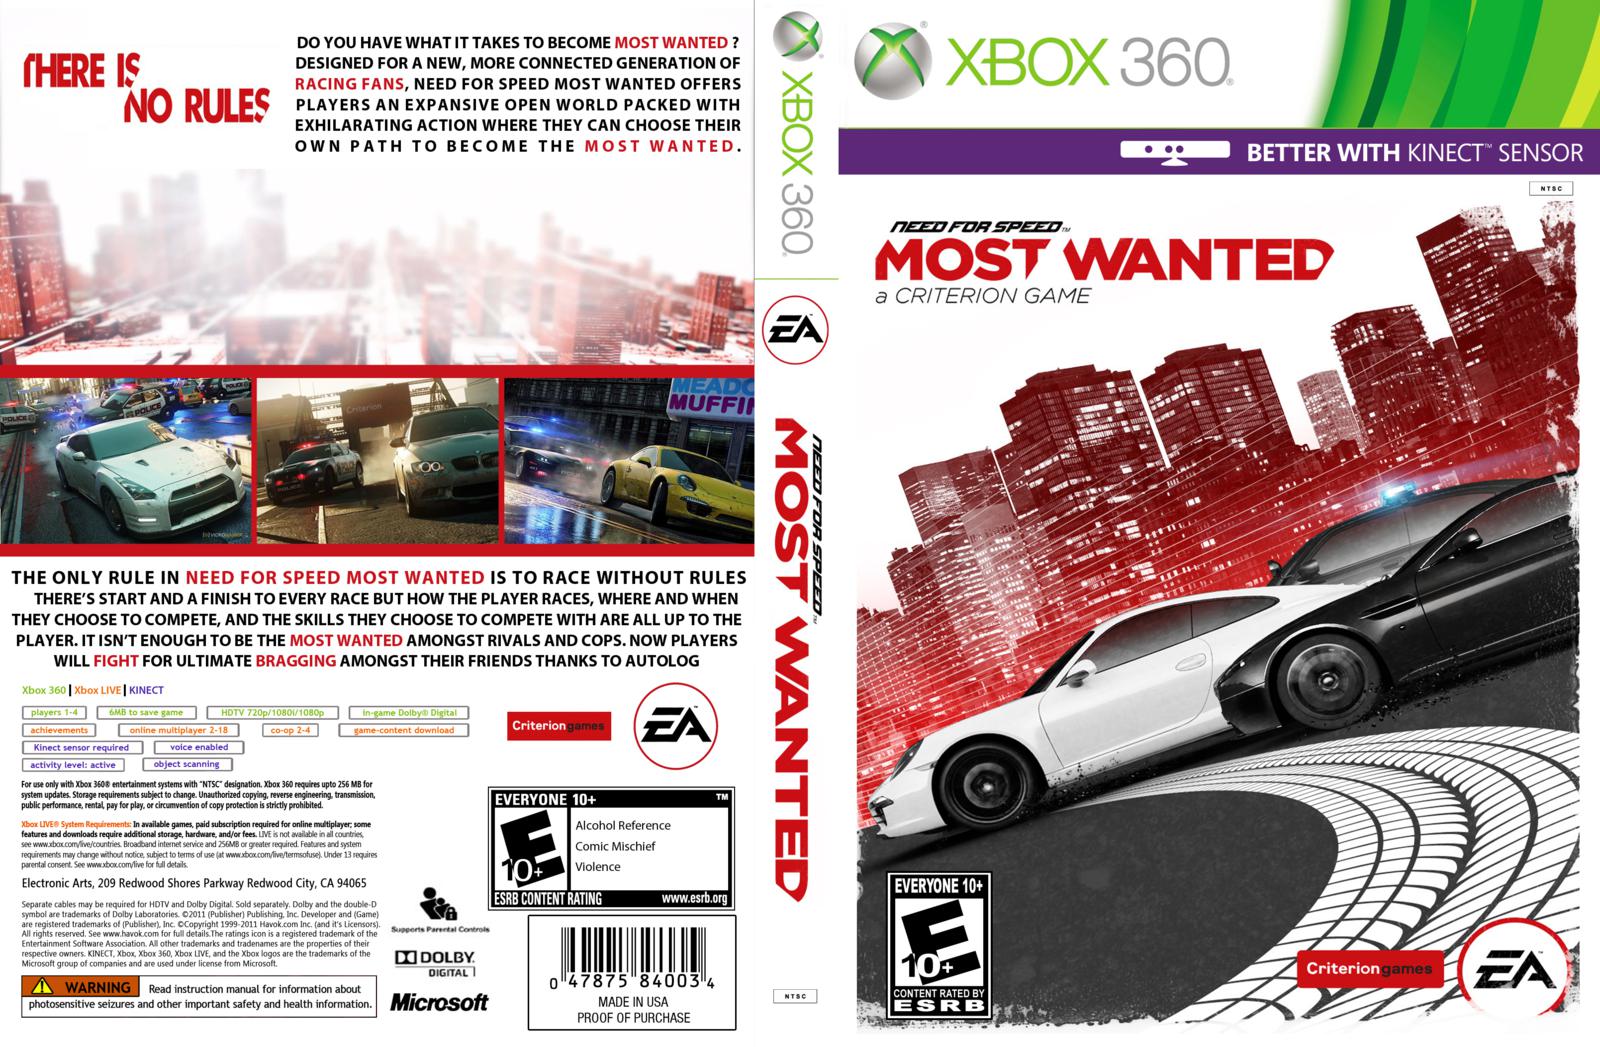 Nfs most wanted xbox. Need for Speed most wanted 2012 Xbox 360. Need for Speed most wanted Xbox 360 обложка. Need for Speed most wanted Xbox 360 диск. NFS MW 2012 Xbox 360.